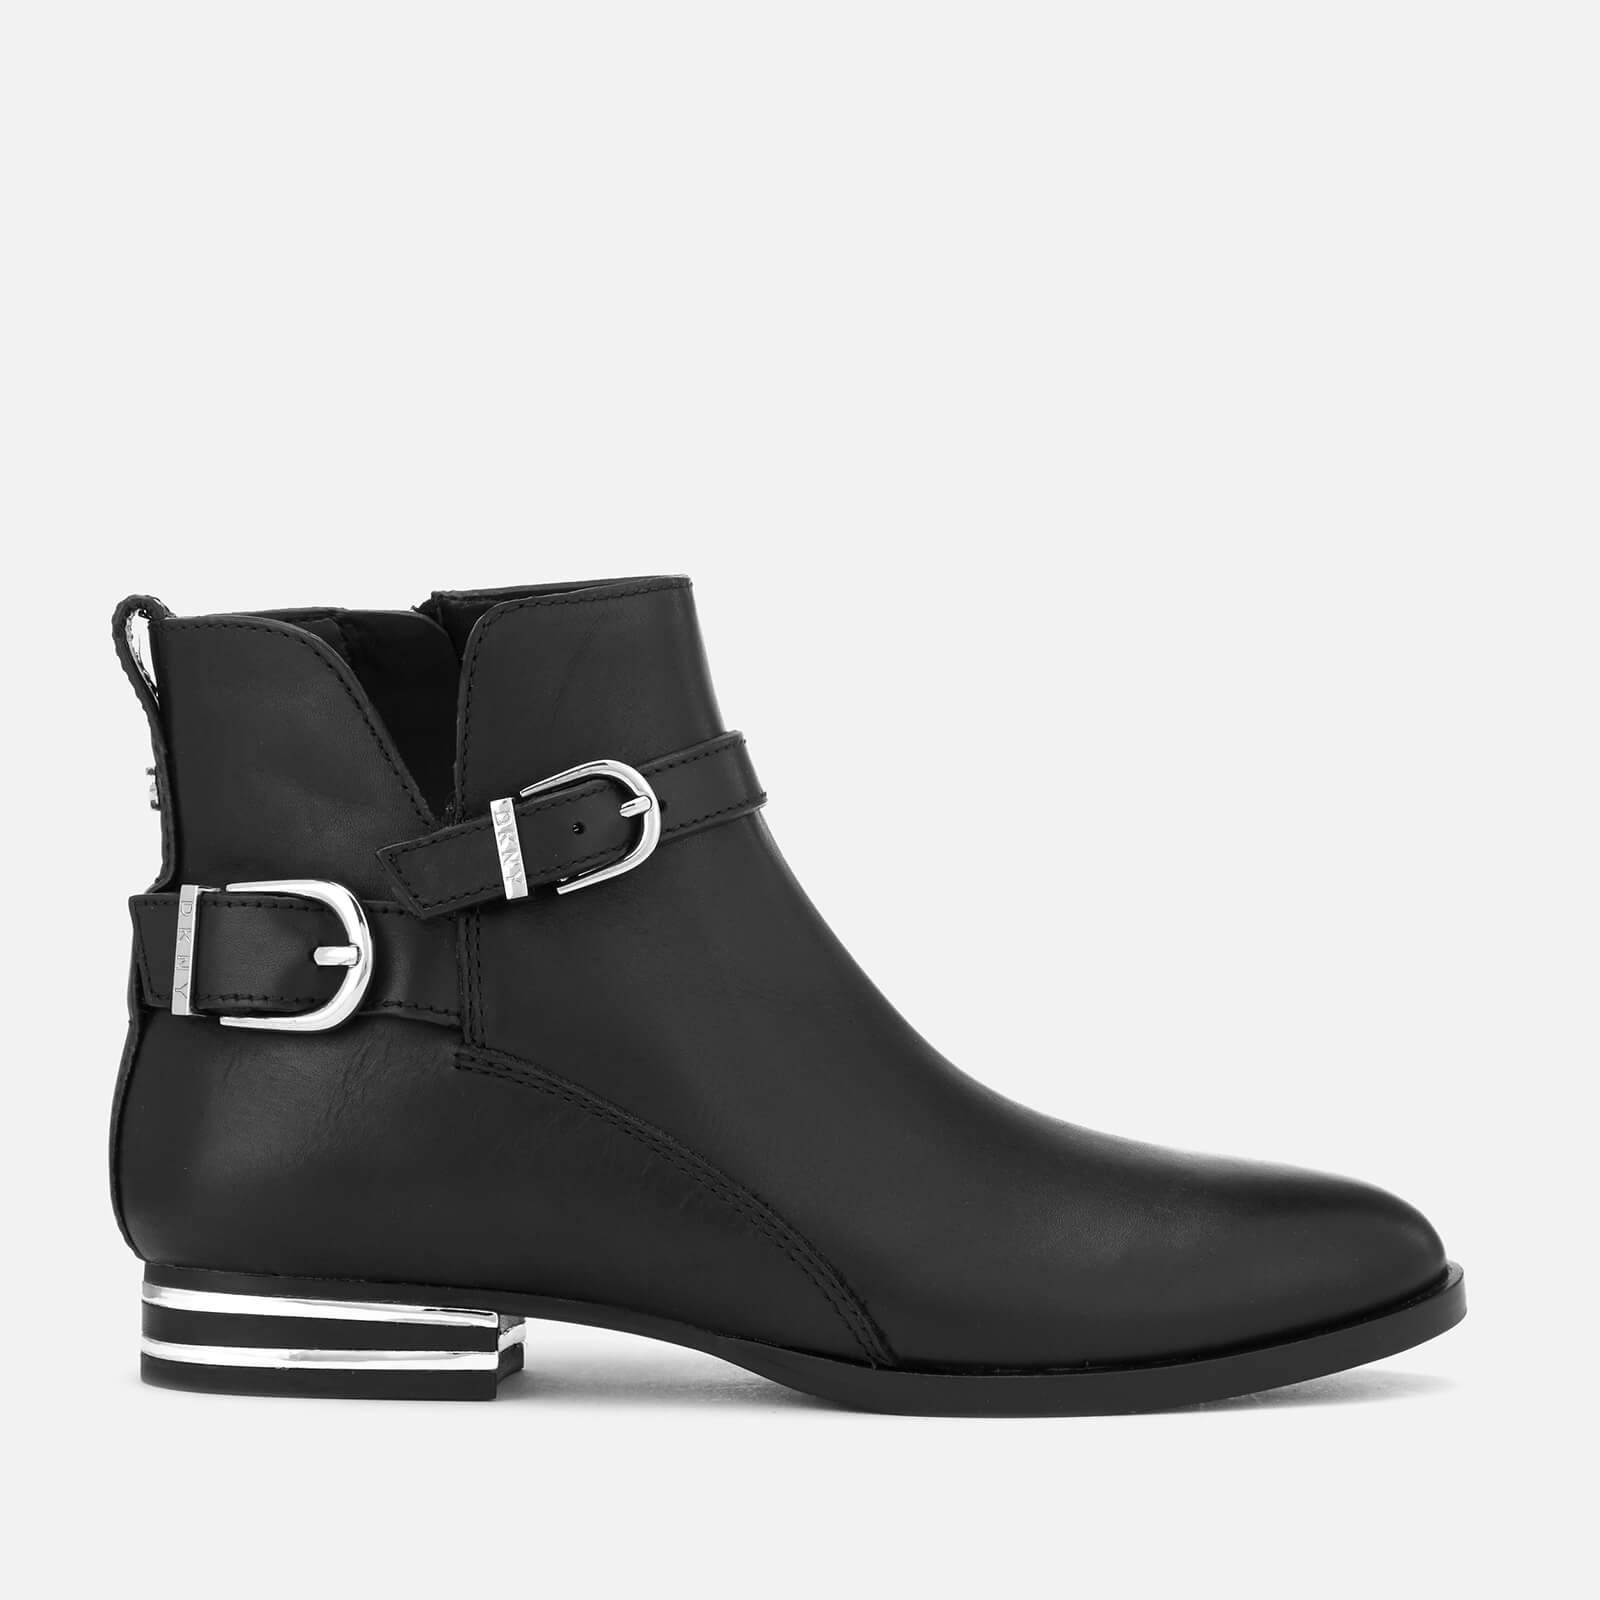 DKNY Lily Ankle Boots in Black - Lyst